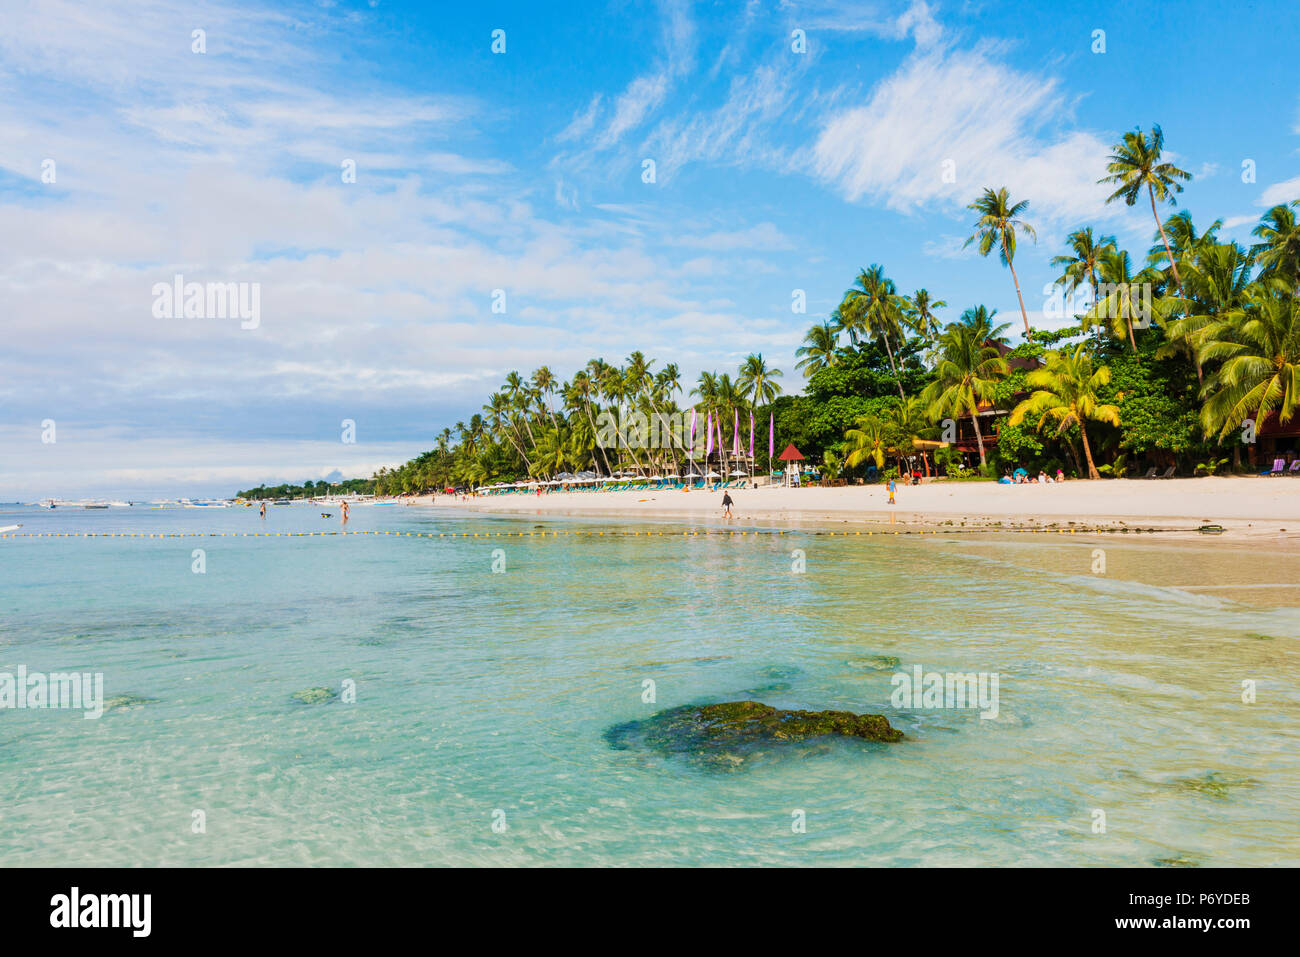 Asia, South East Asia, Philippines, Central Visayas, Bohol, White Beach Stock Photo